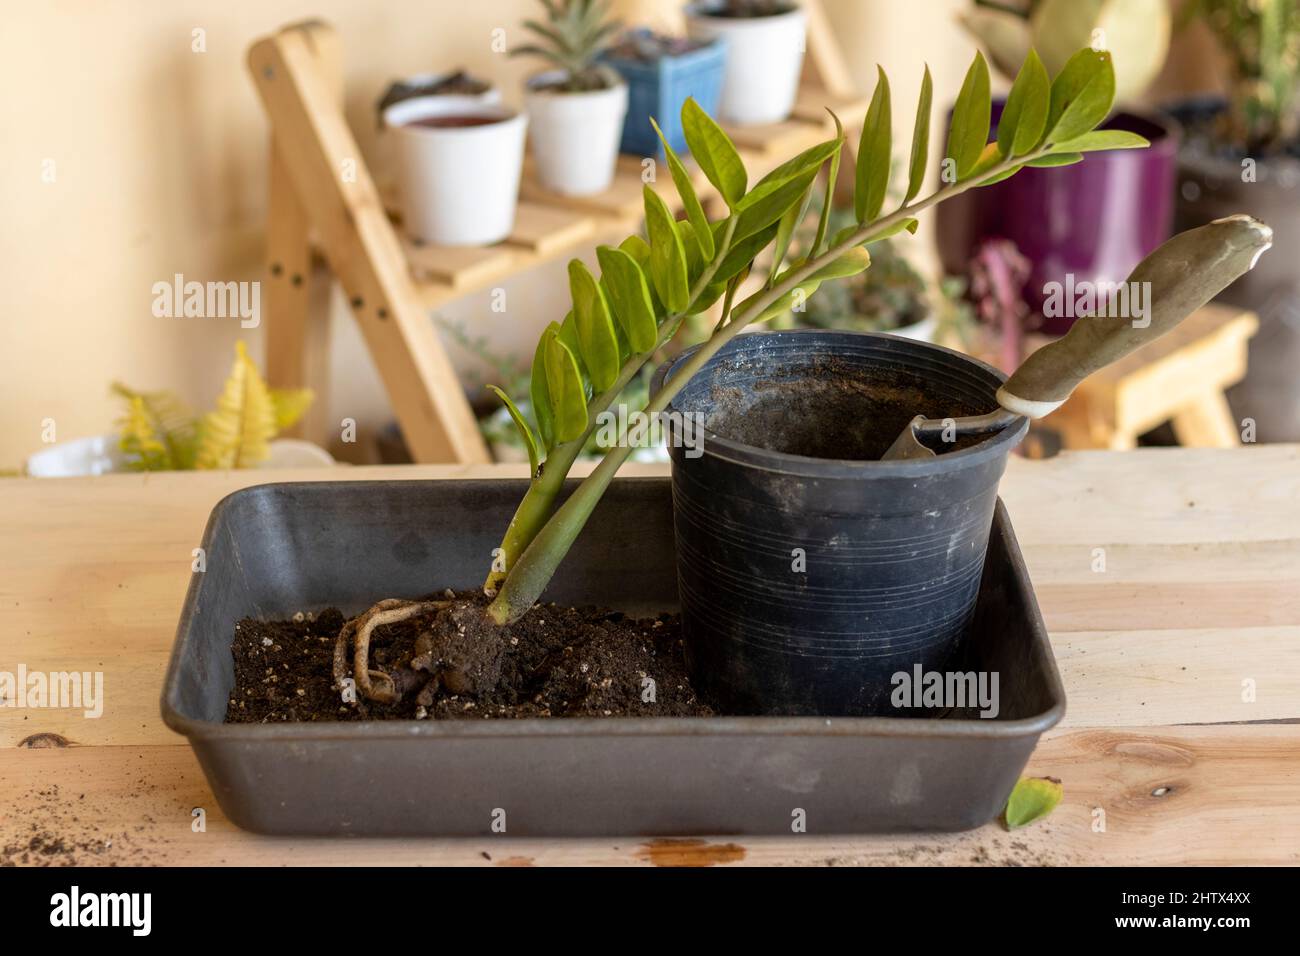 Propagating Zamioculcas zamiifolia plant by roots division Stock Photo